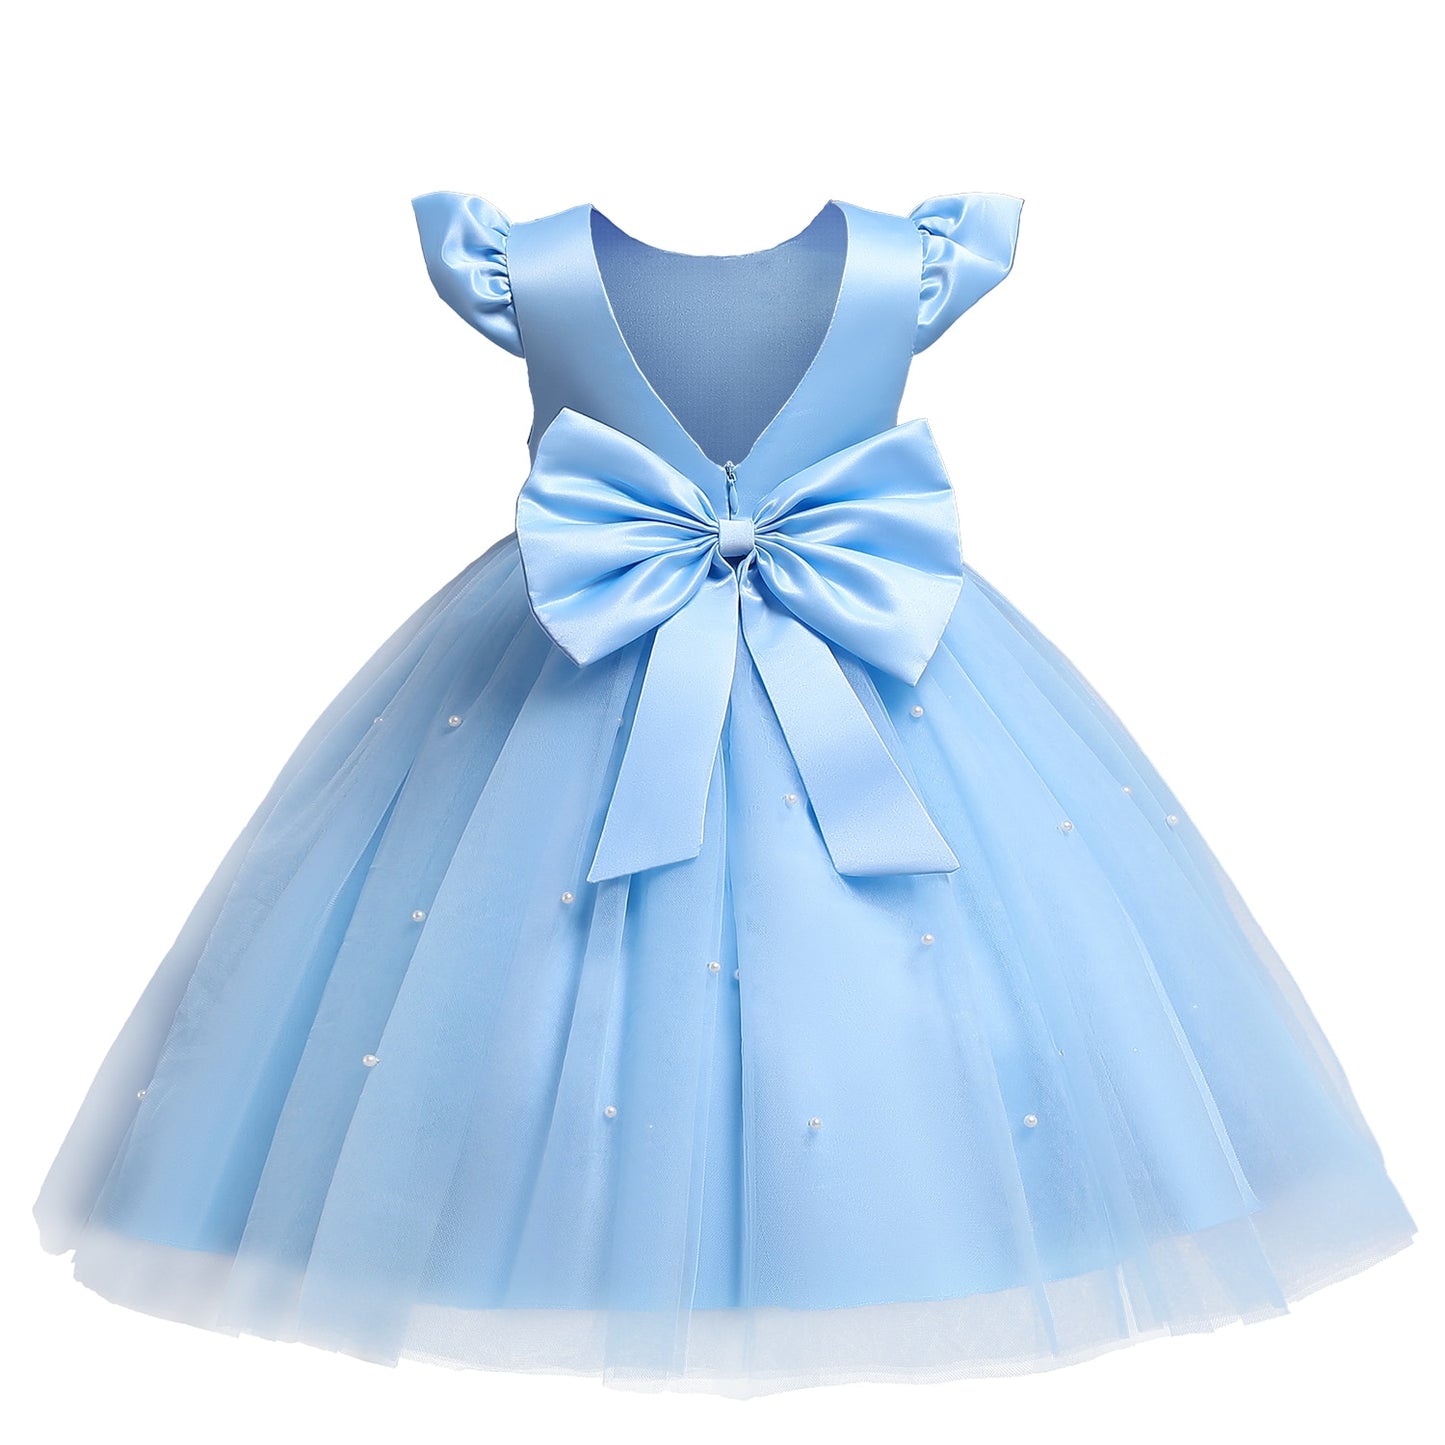 Load image into Gallery viewer, Cute Baby 1-5 Yrs Toddler Girls Embroidery Lace Party Dresses
